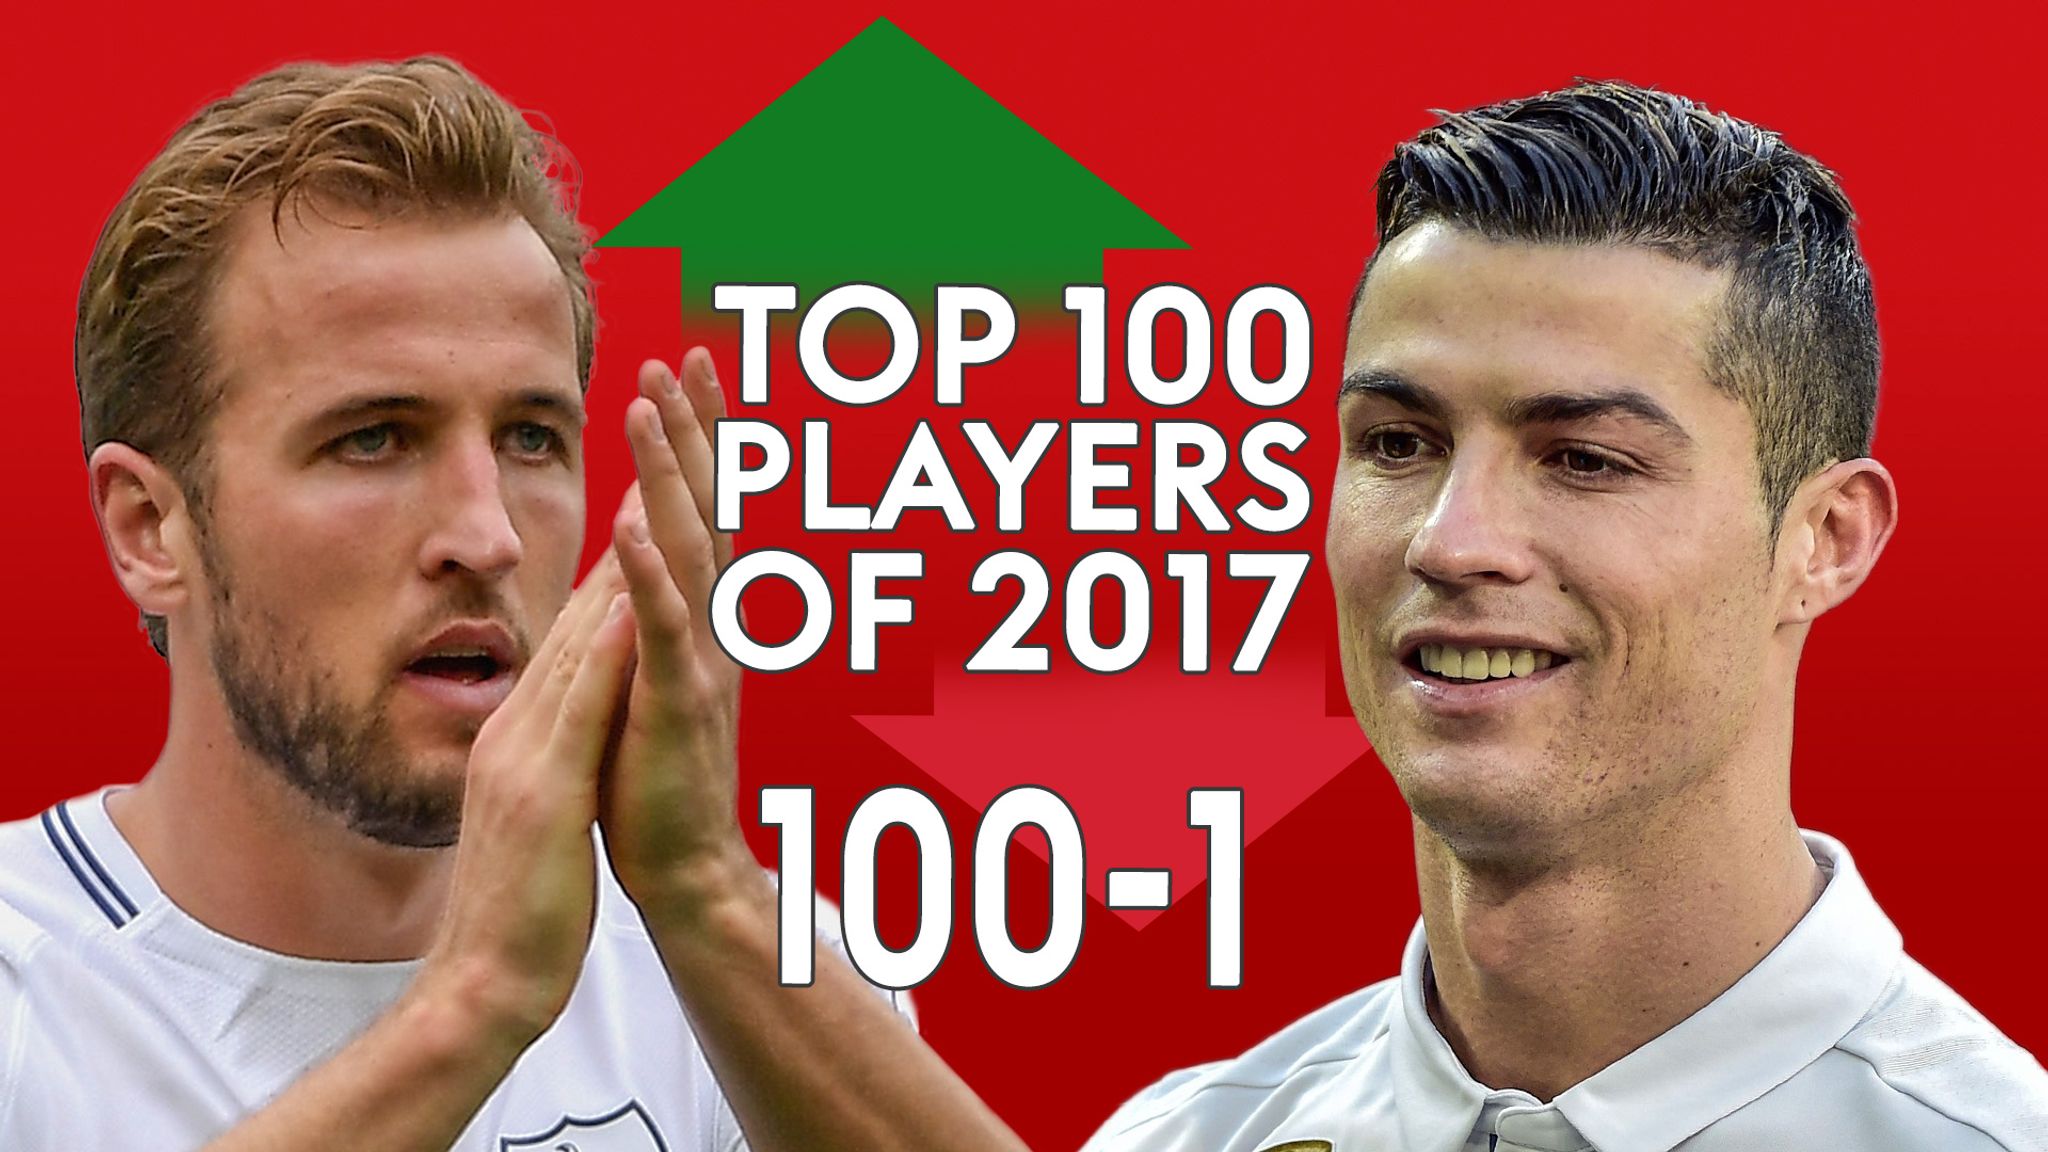 The 100 best football players of all time: 10-1 - Ranked! The 100 best  football players of all time